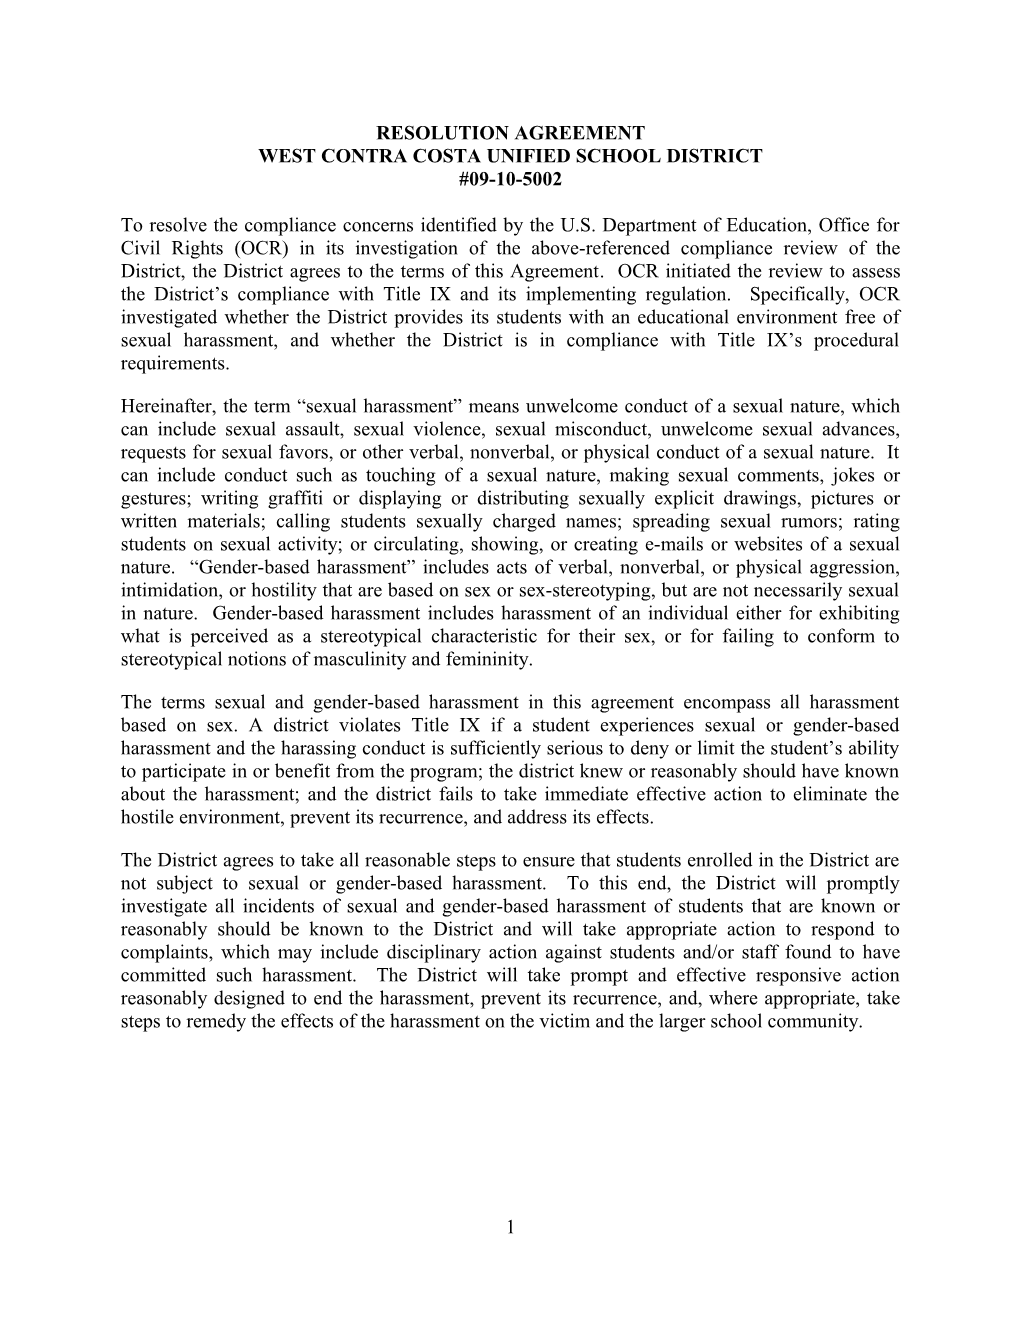 Resolution Agreement, West Contra Costa Unified School District, California: Compliance